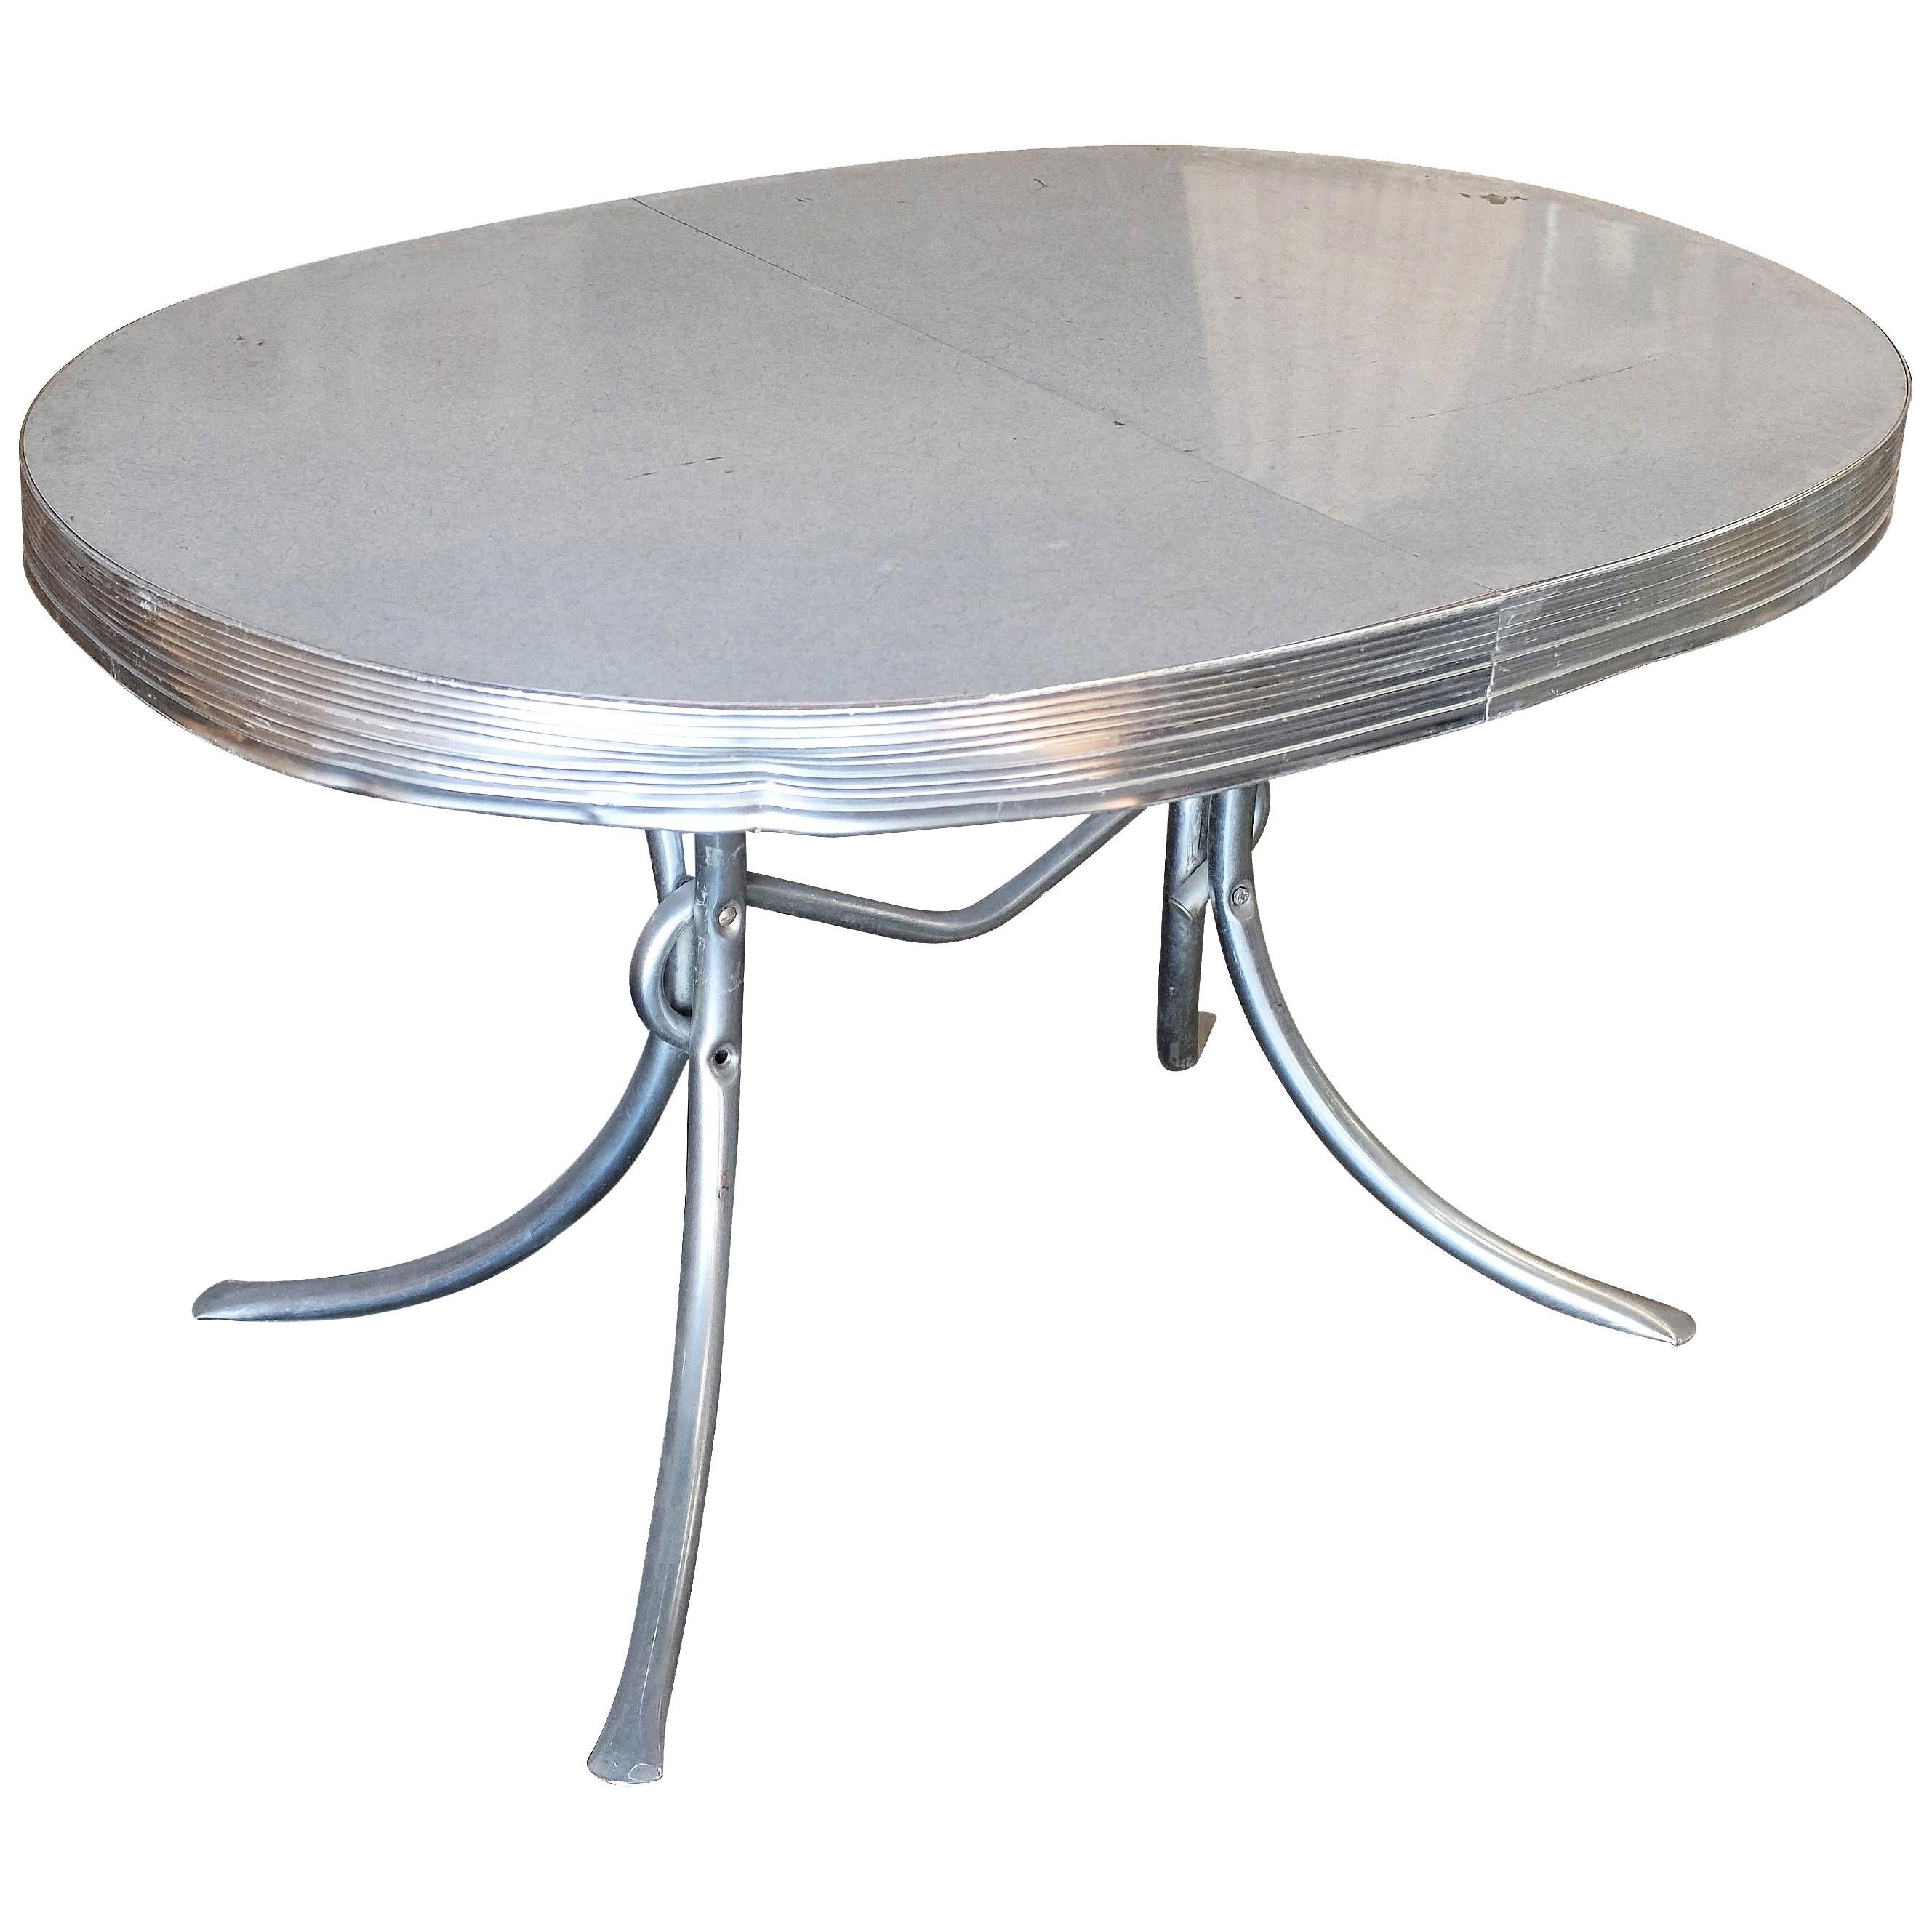 Midcentury Oval Formica Kitchen Dining Table with Chrome Legs